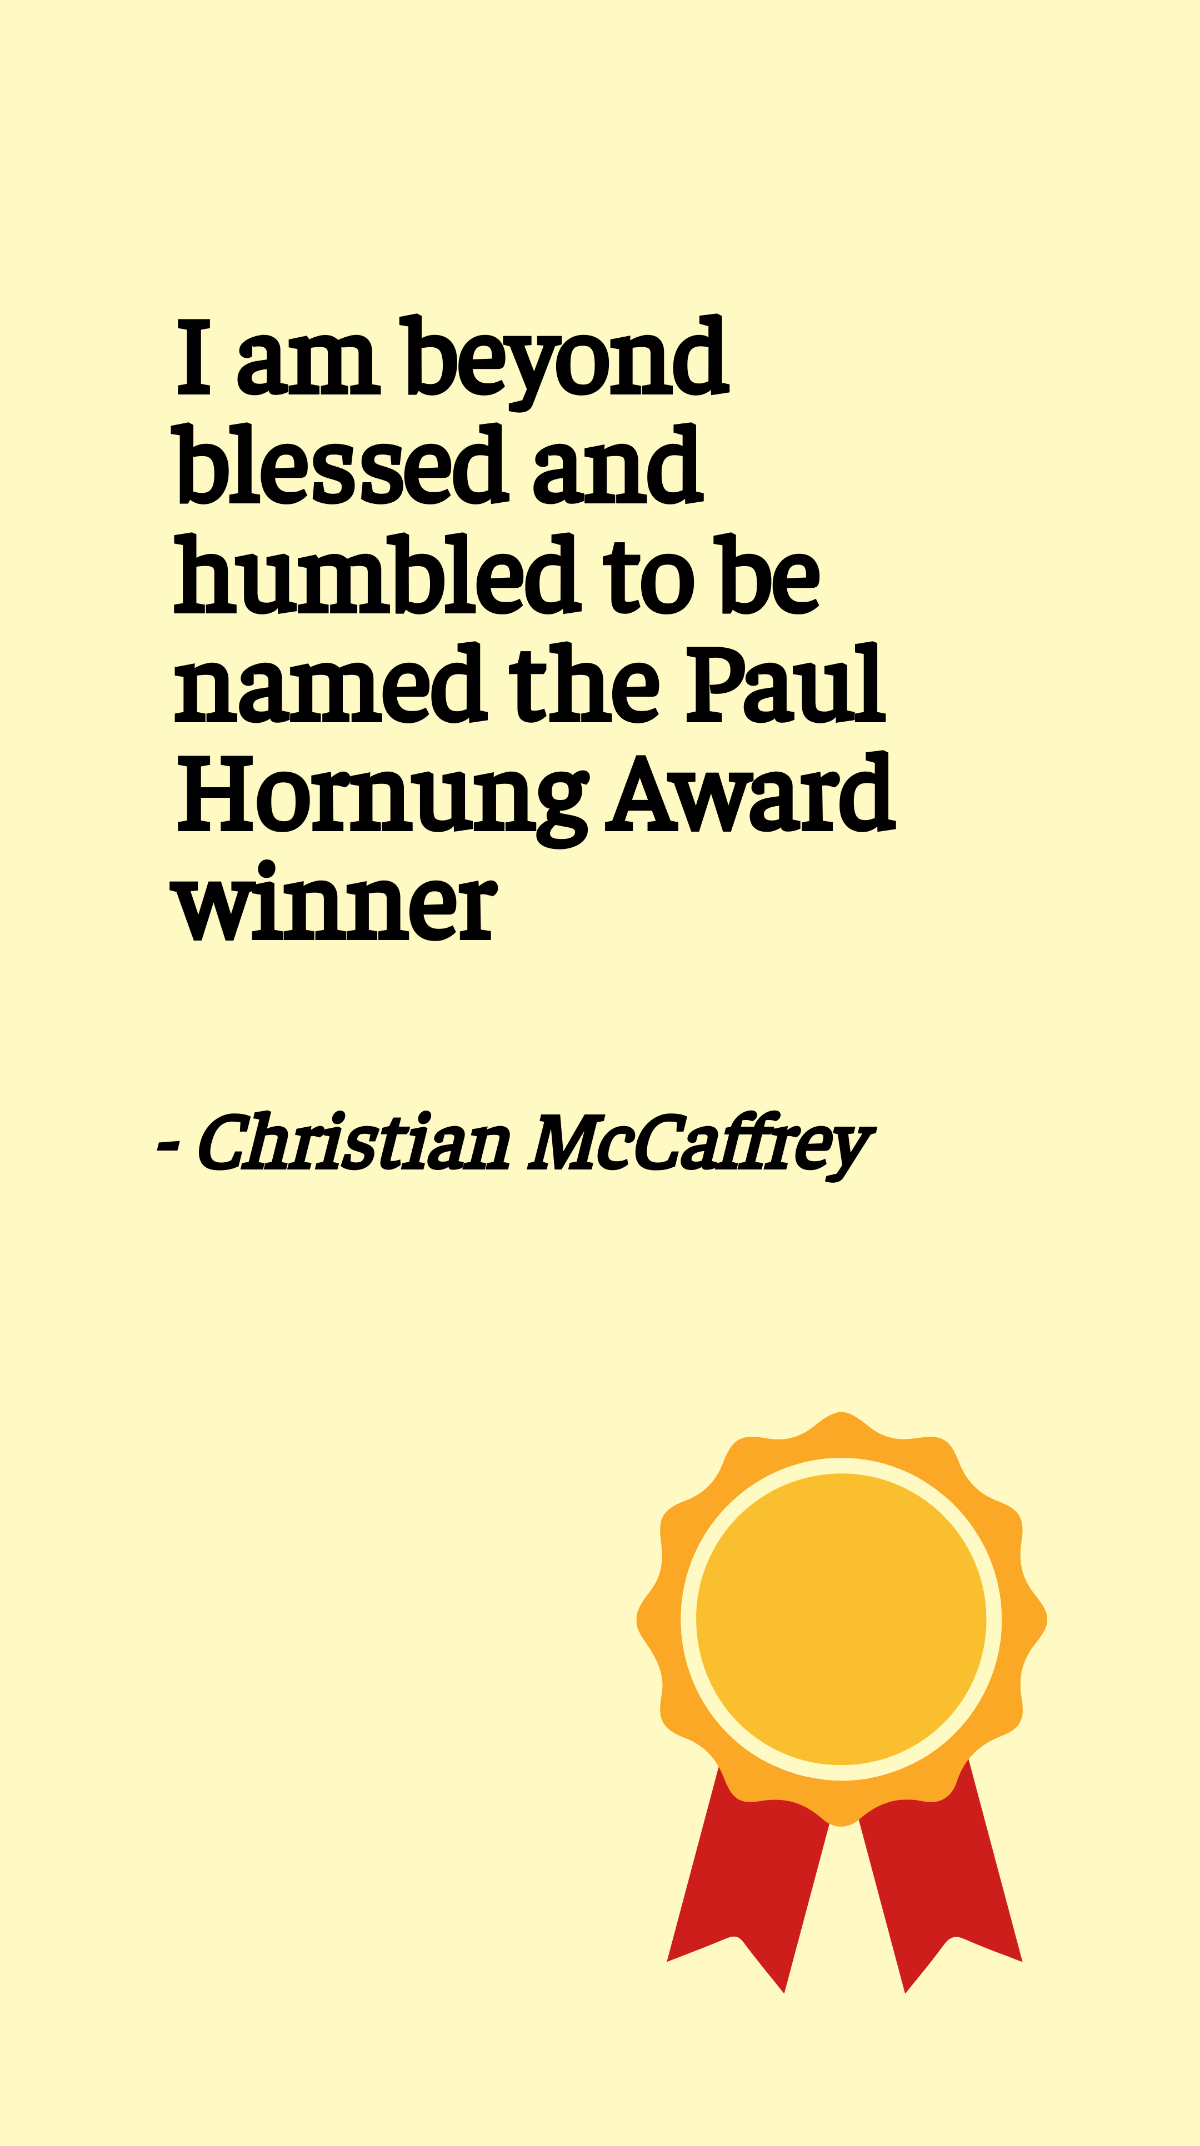 Christian McCaffrey - I am beyond blessed and humbled to be named the Paul Hornung Award winner Template